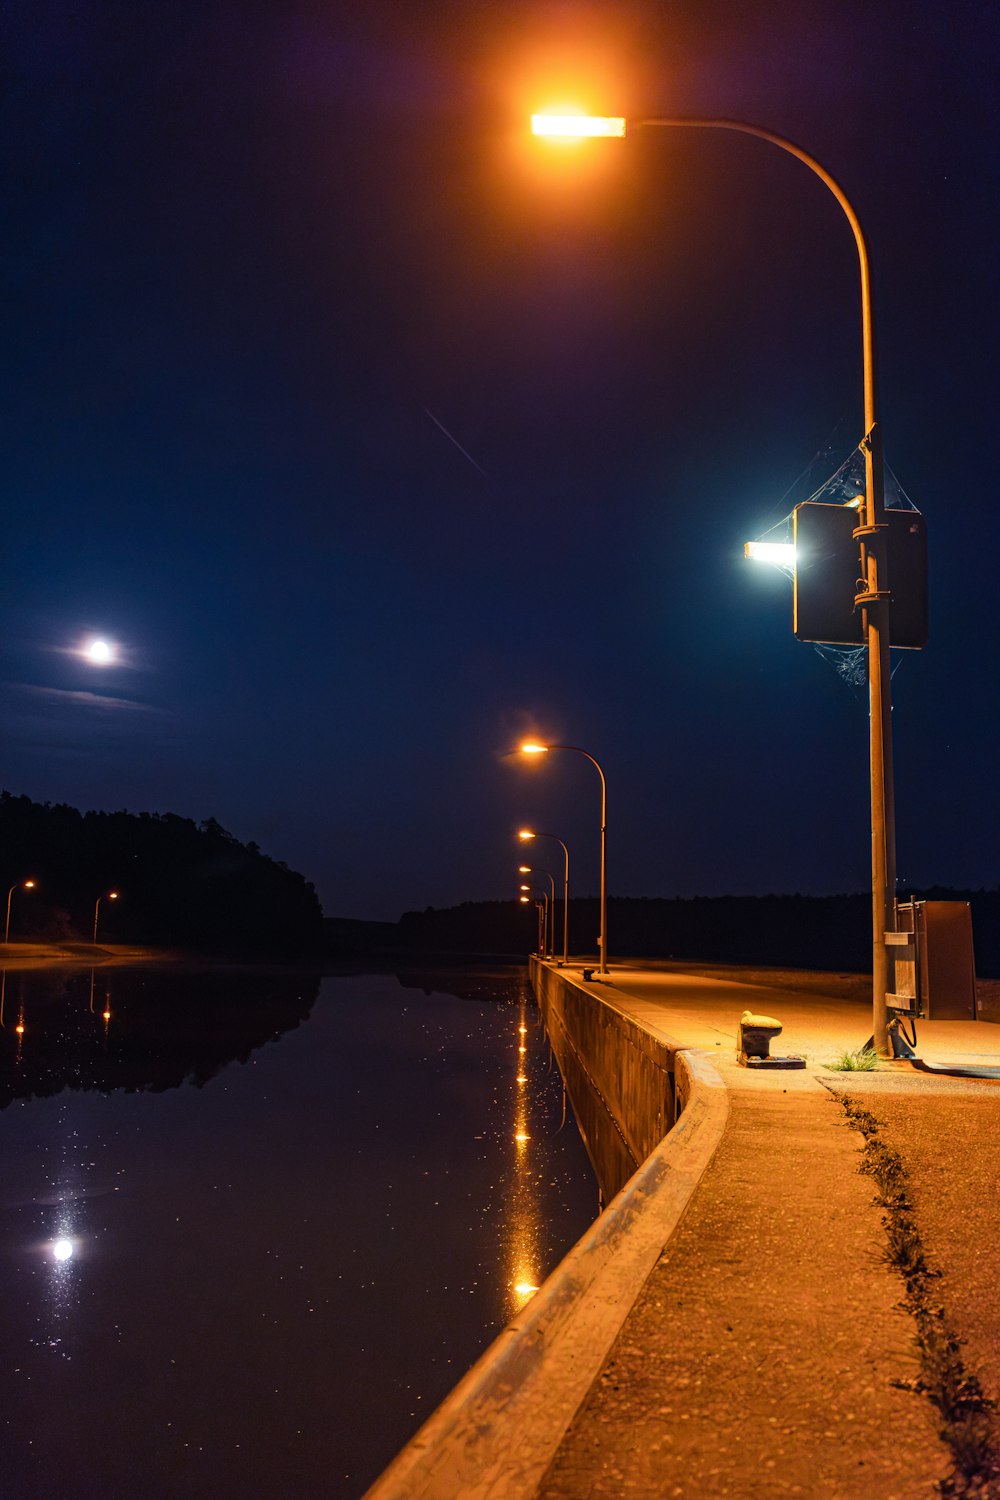 a street light next to a body of water at night